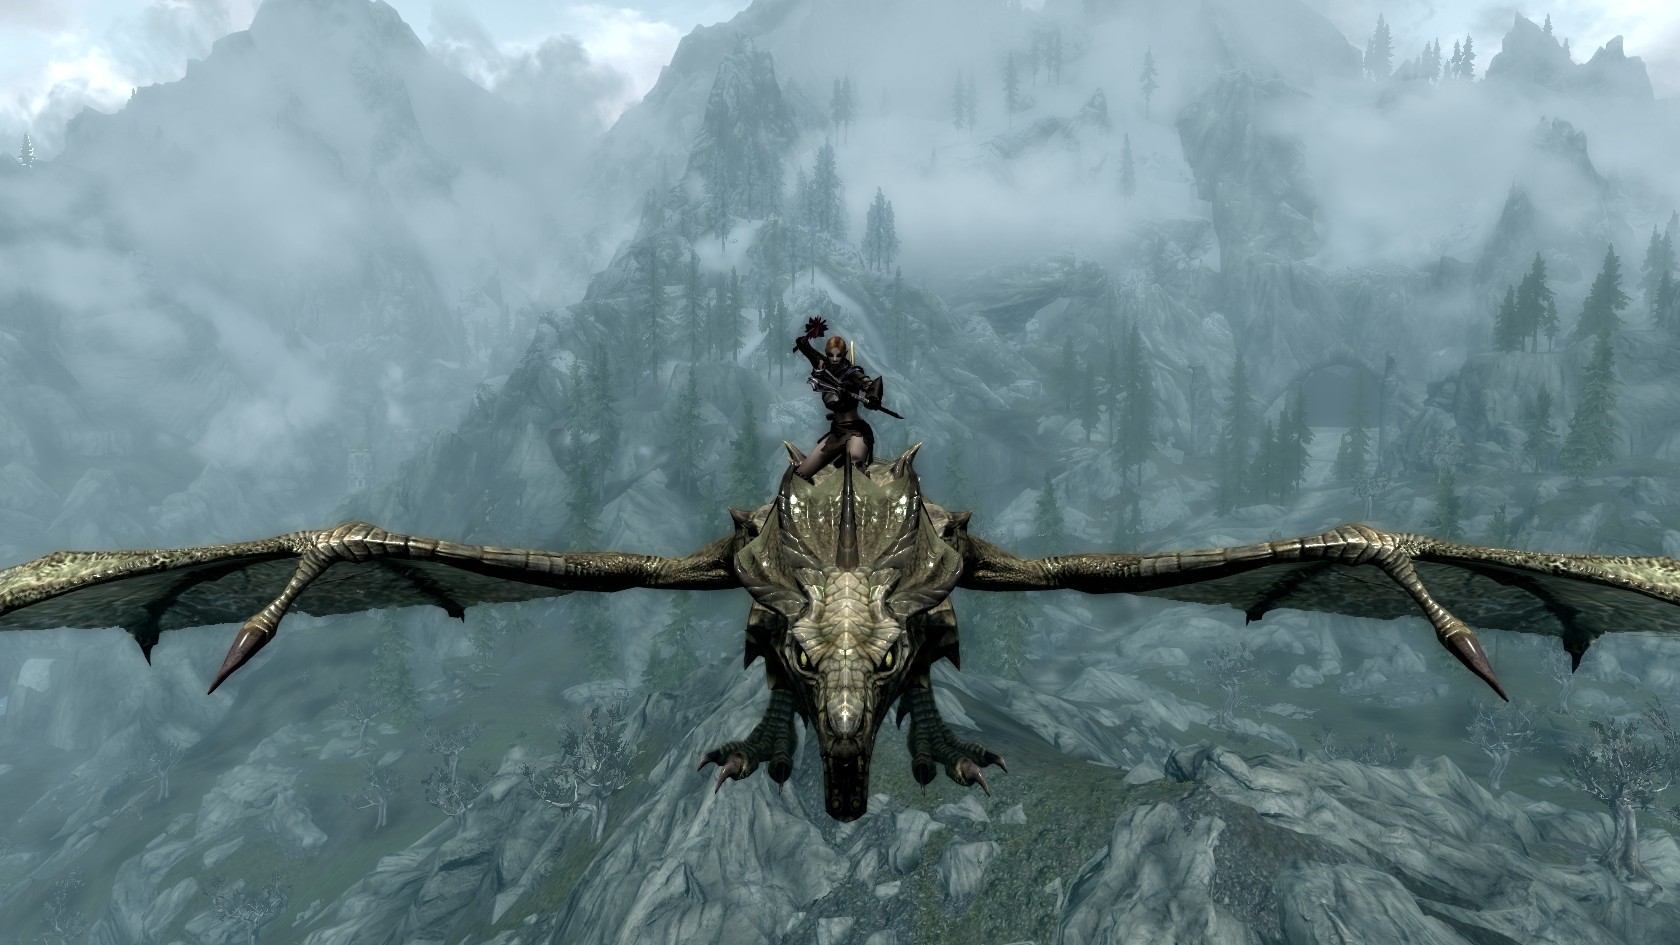 Riding nocturnes dragon dick with fan image